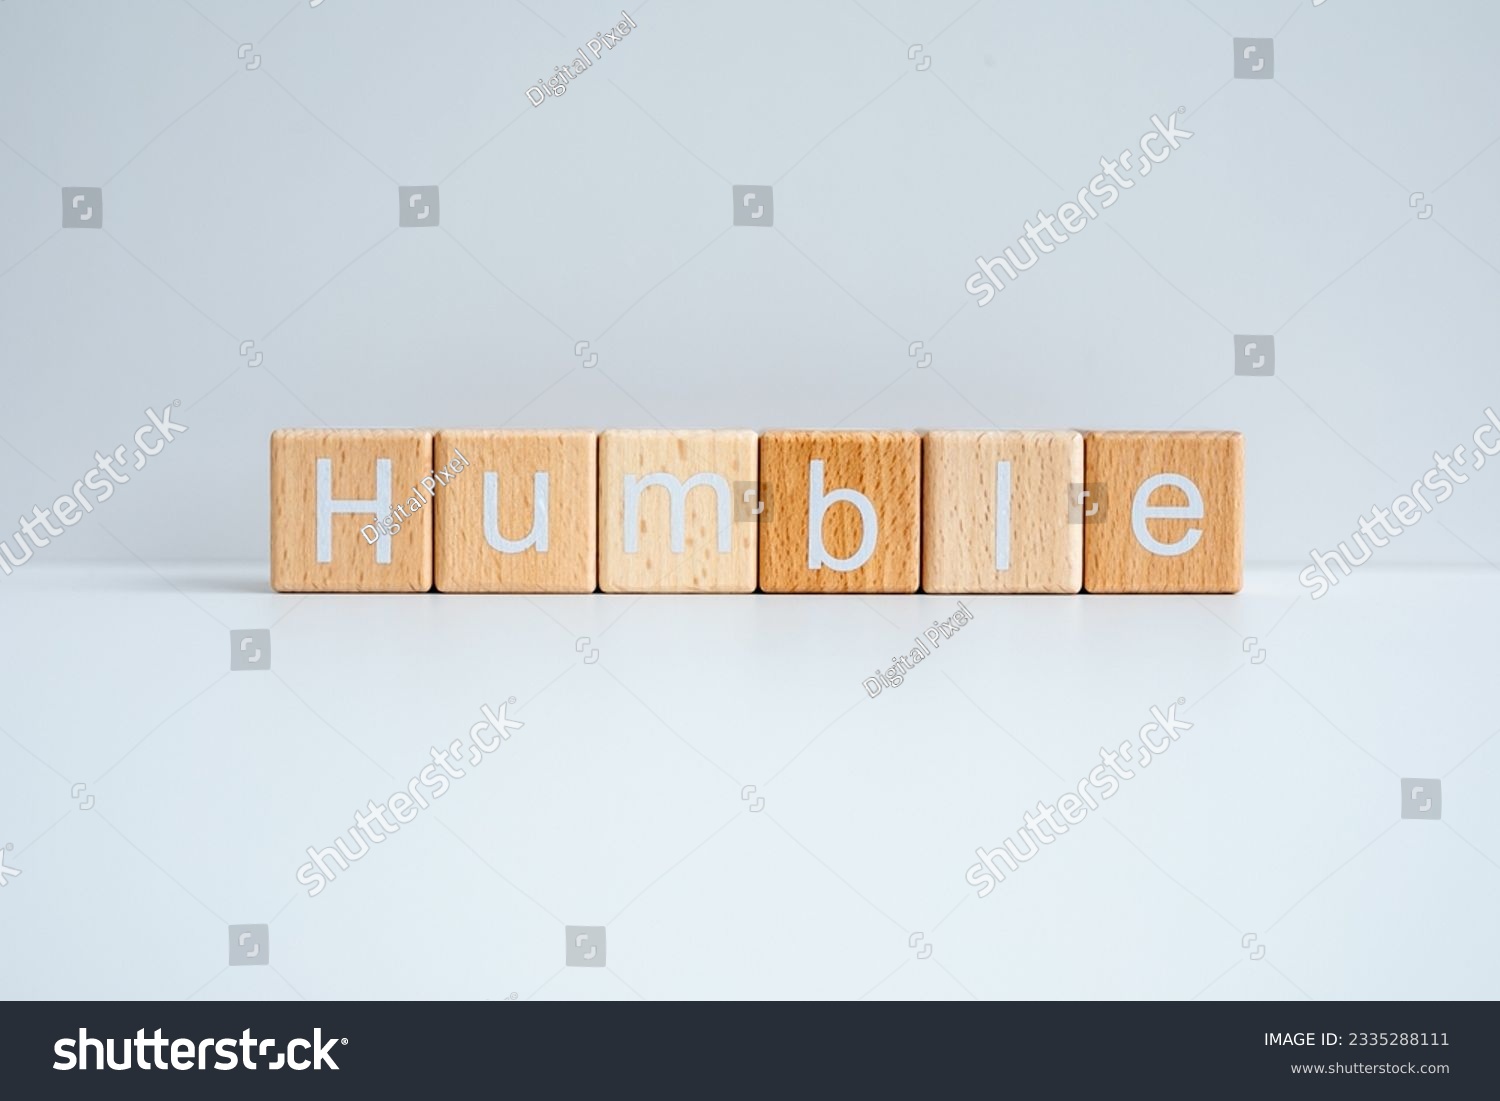 Wooden blocks form the text "Humble" against a white background. #2335288111